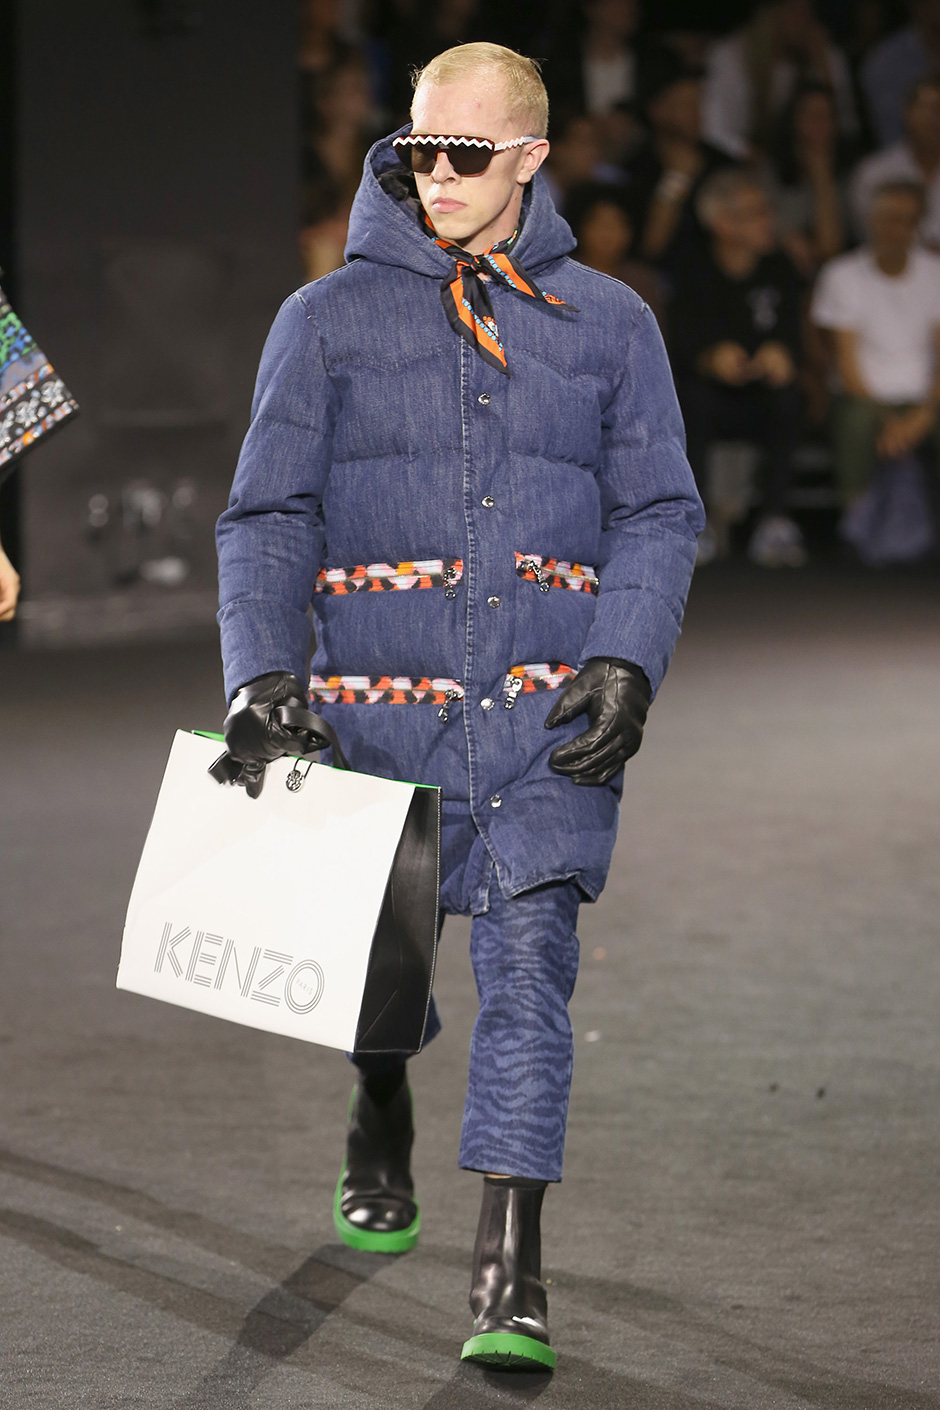 KENZO x H&M Fashion Show, Launch Party & Ice Cube Performance ...